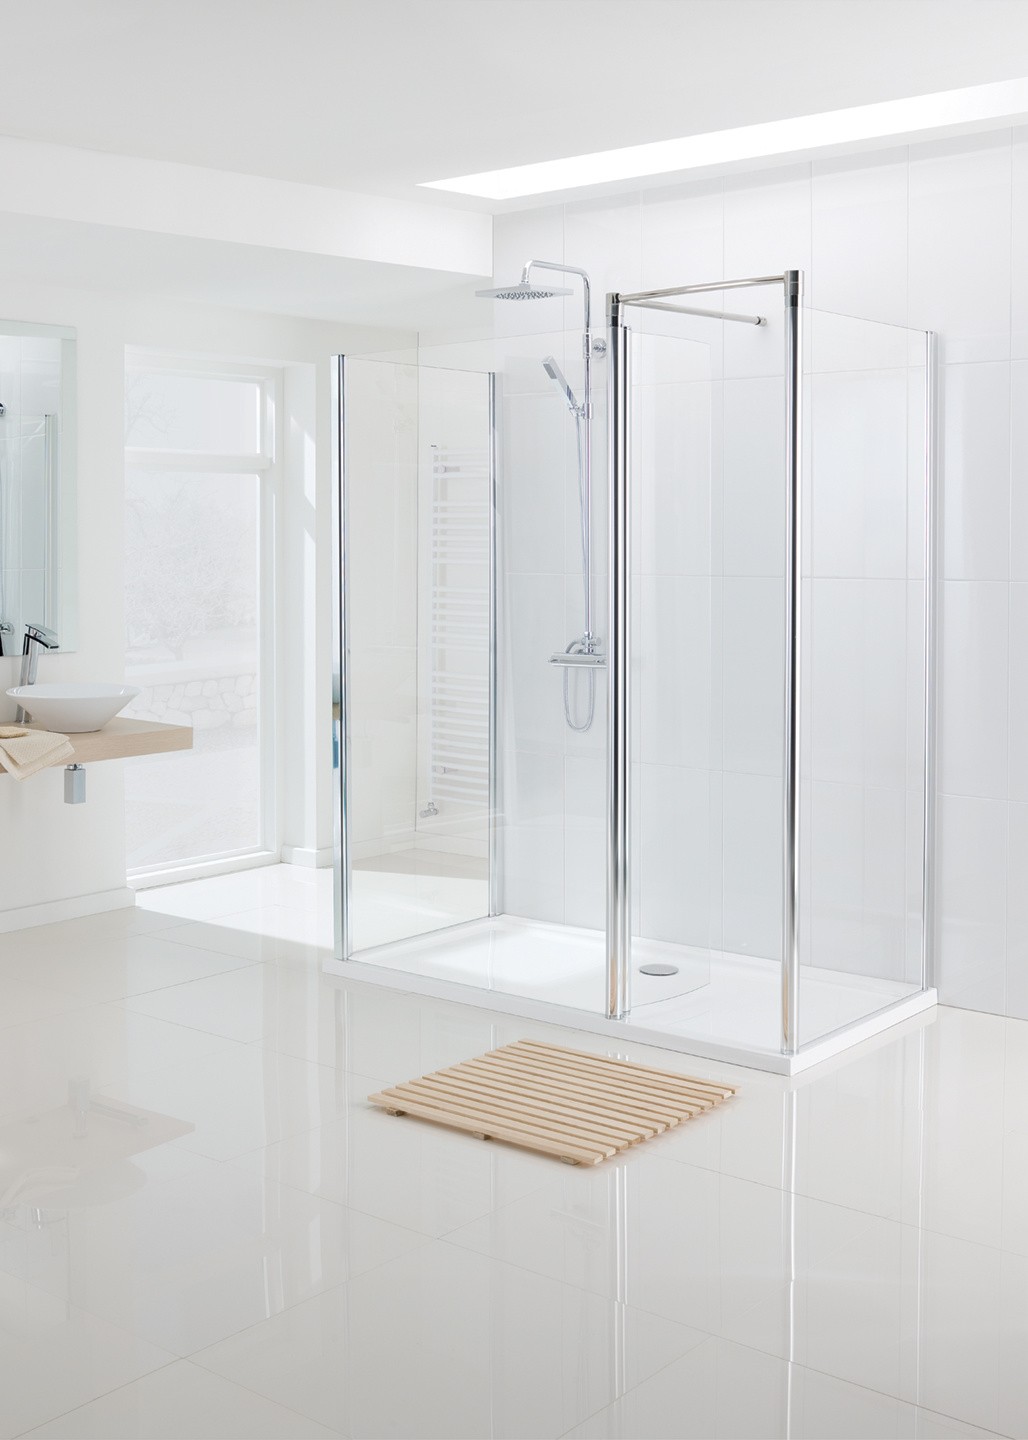 Lakes LWSP100S Walk-In Classic 6mm Semi-Frameless Side Panel 1000x1850 + 85mm (Shower Front Panel & Return Panel NOT Included)